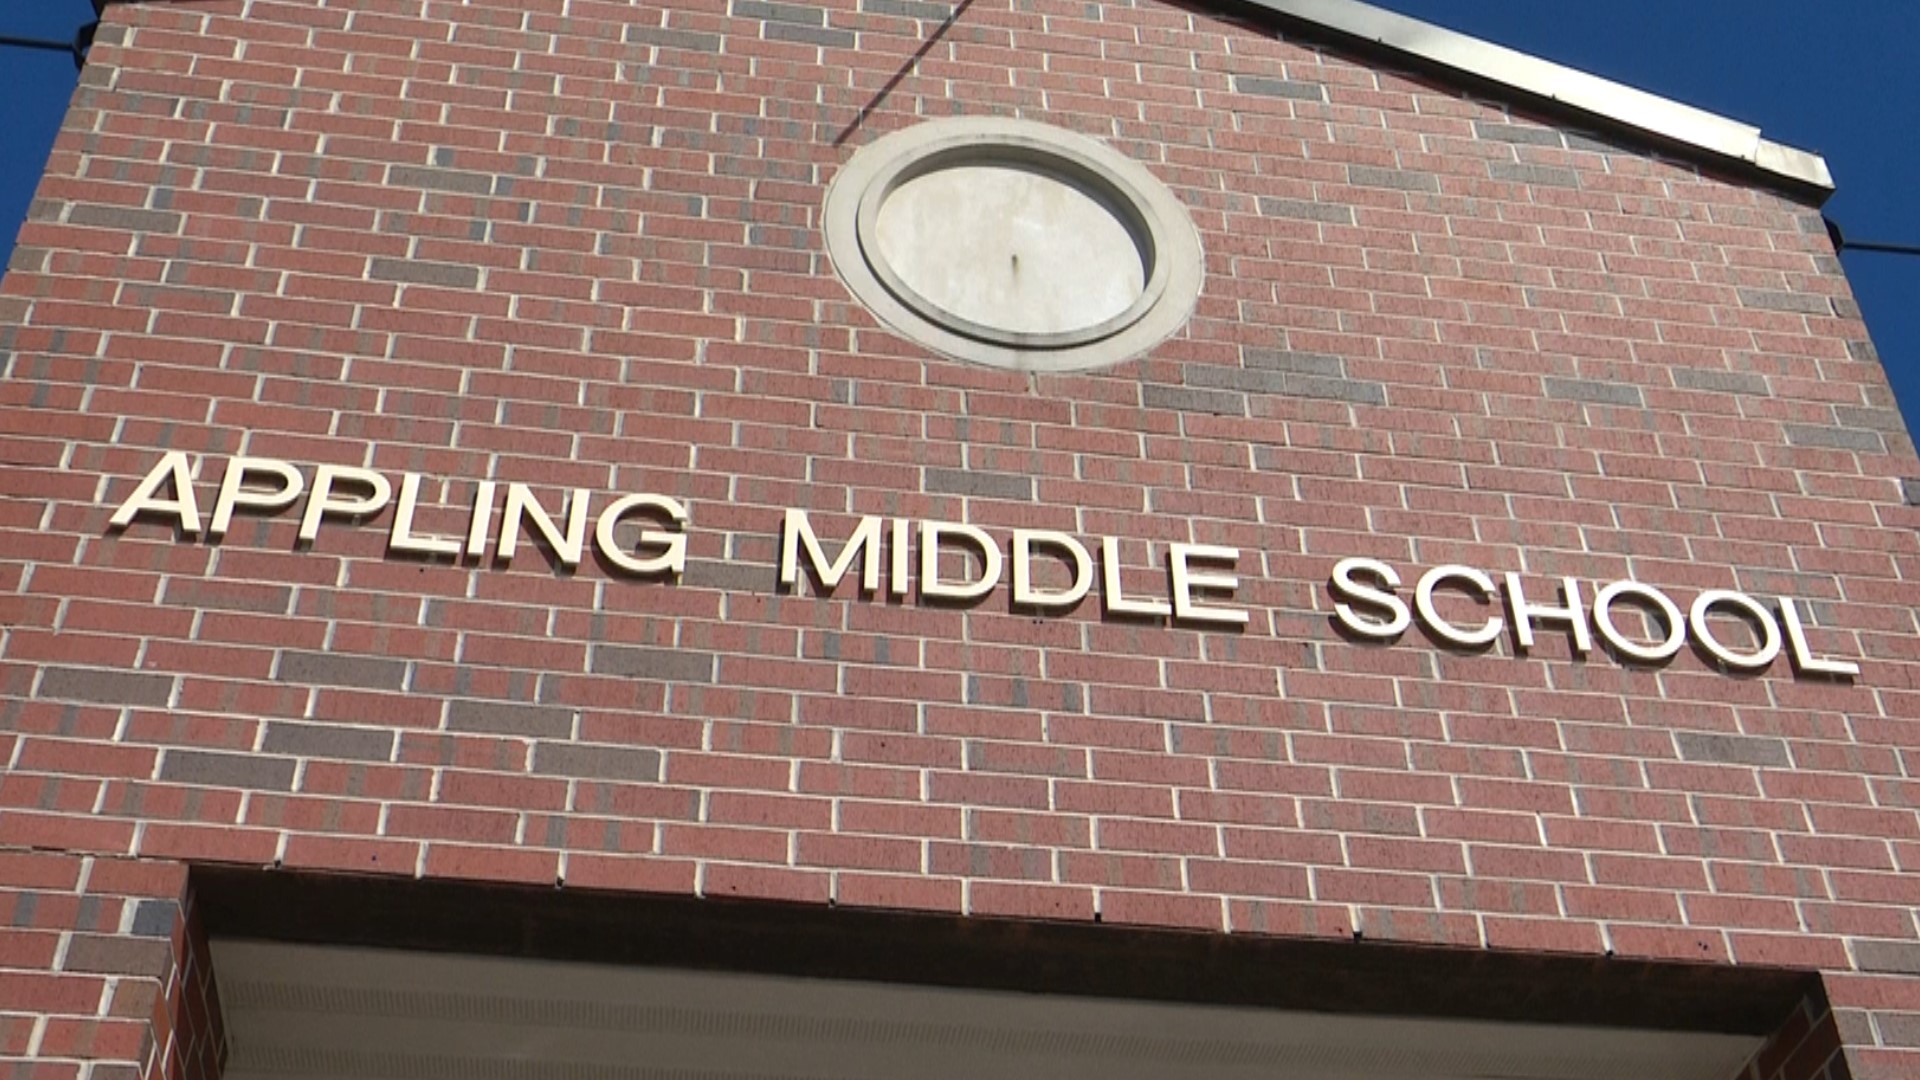 The school board decided to keep the front of the old Appling Middle School to preserve its history.